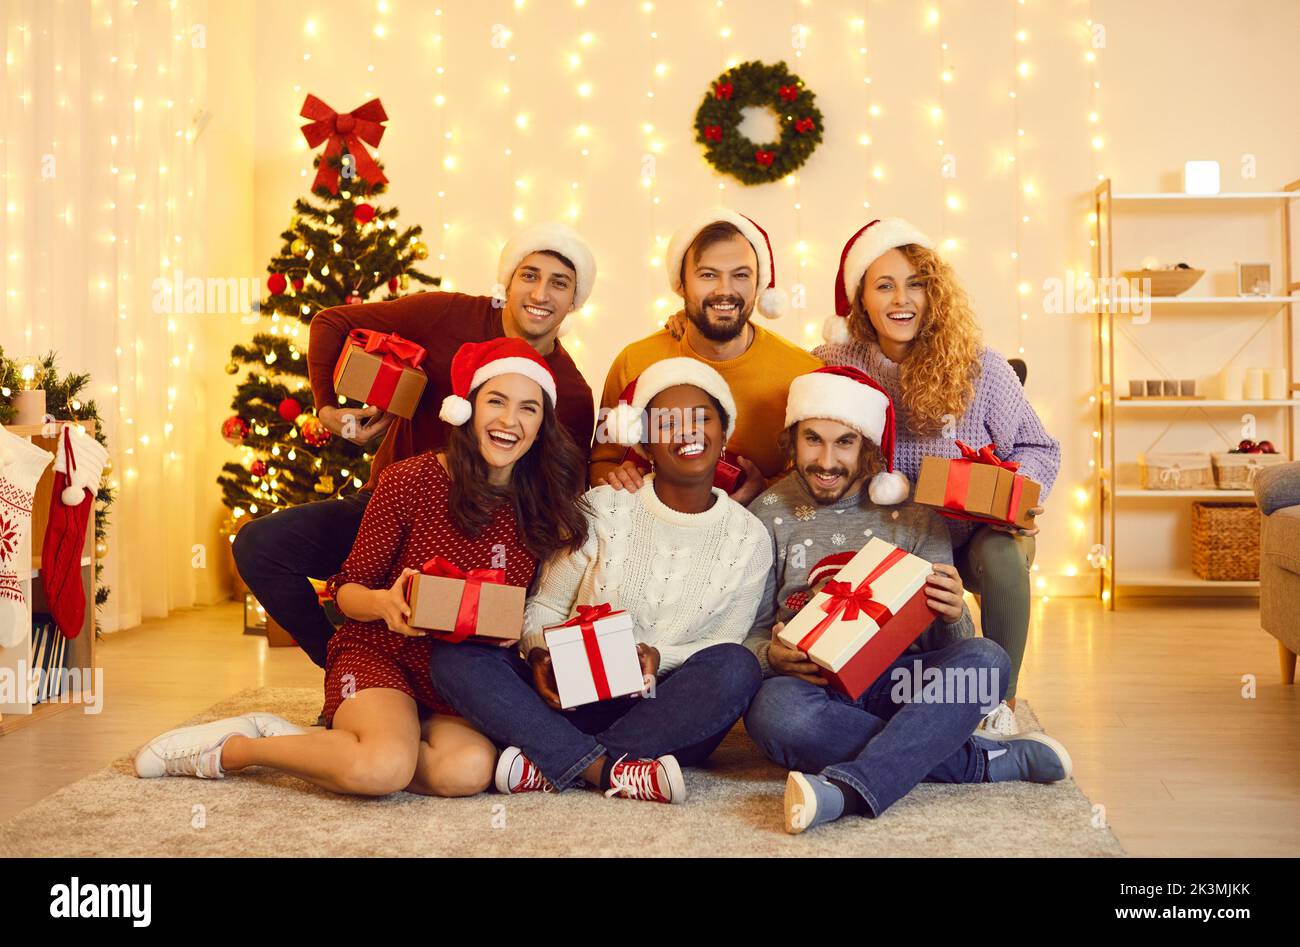 Group portrait of happy young friends who celebrate New Year holidays together at home. Stock Photo